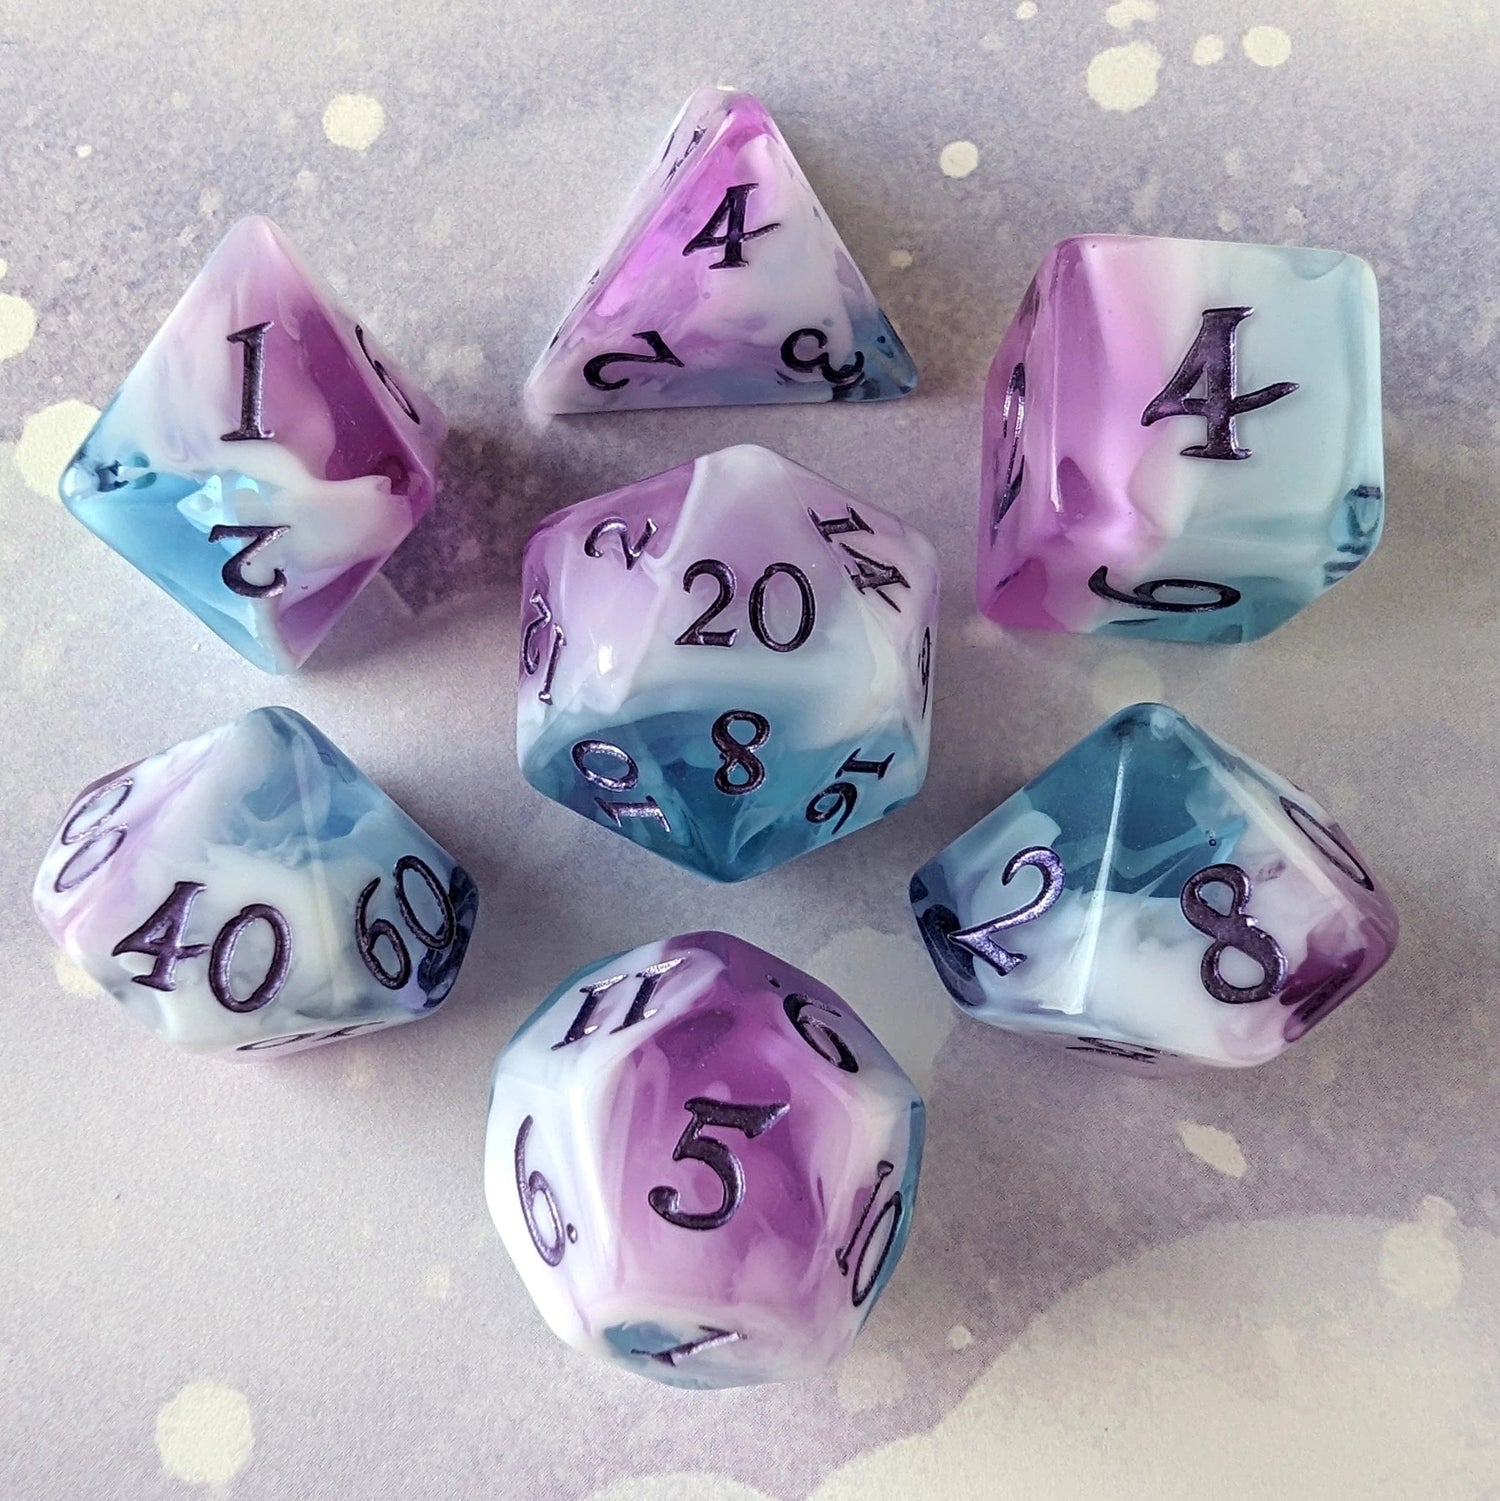 Vale of Dreams - 7 Piece Dice Set - The Fourth Place